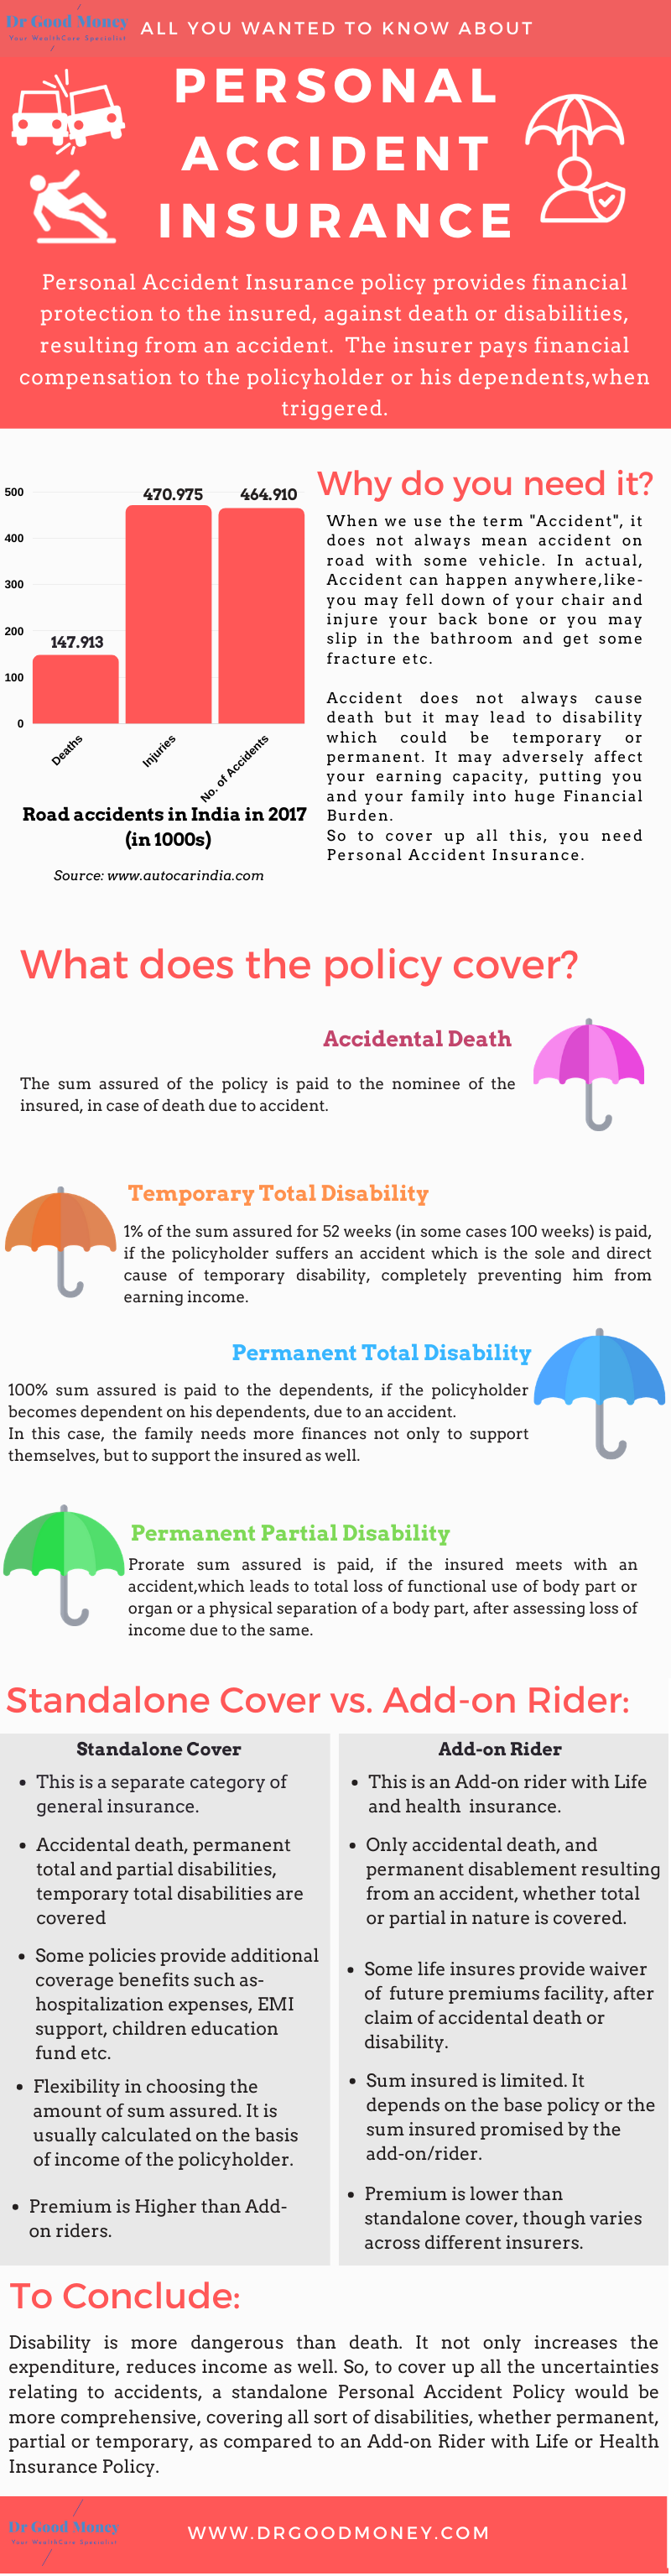 Personal Accident Insurance (infographics)